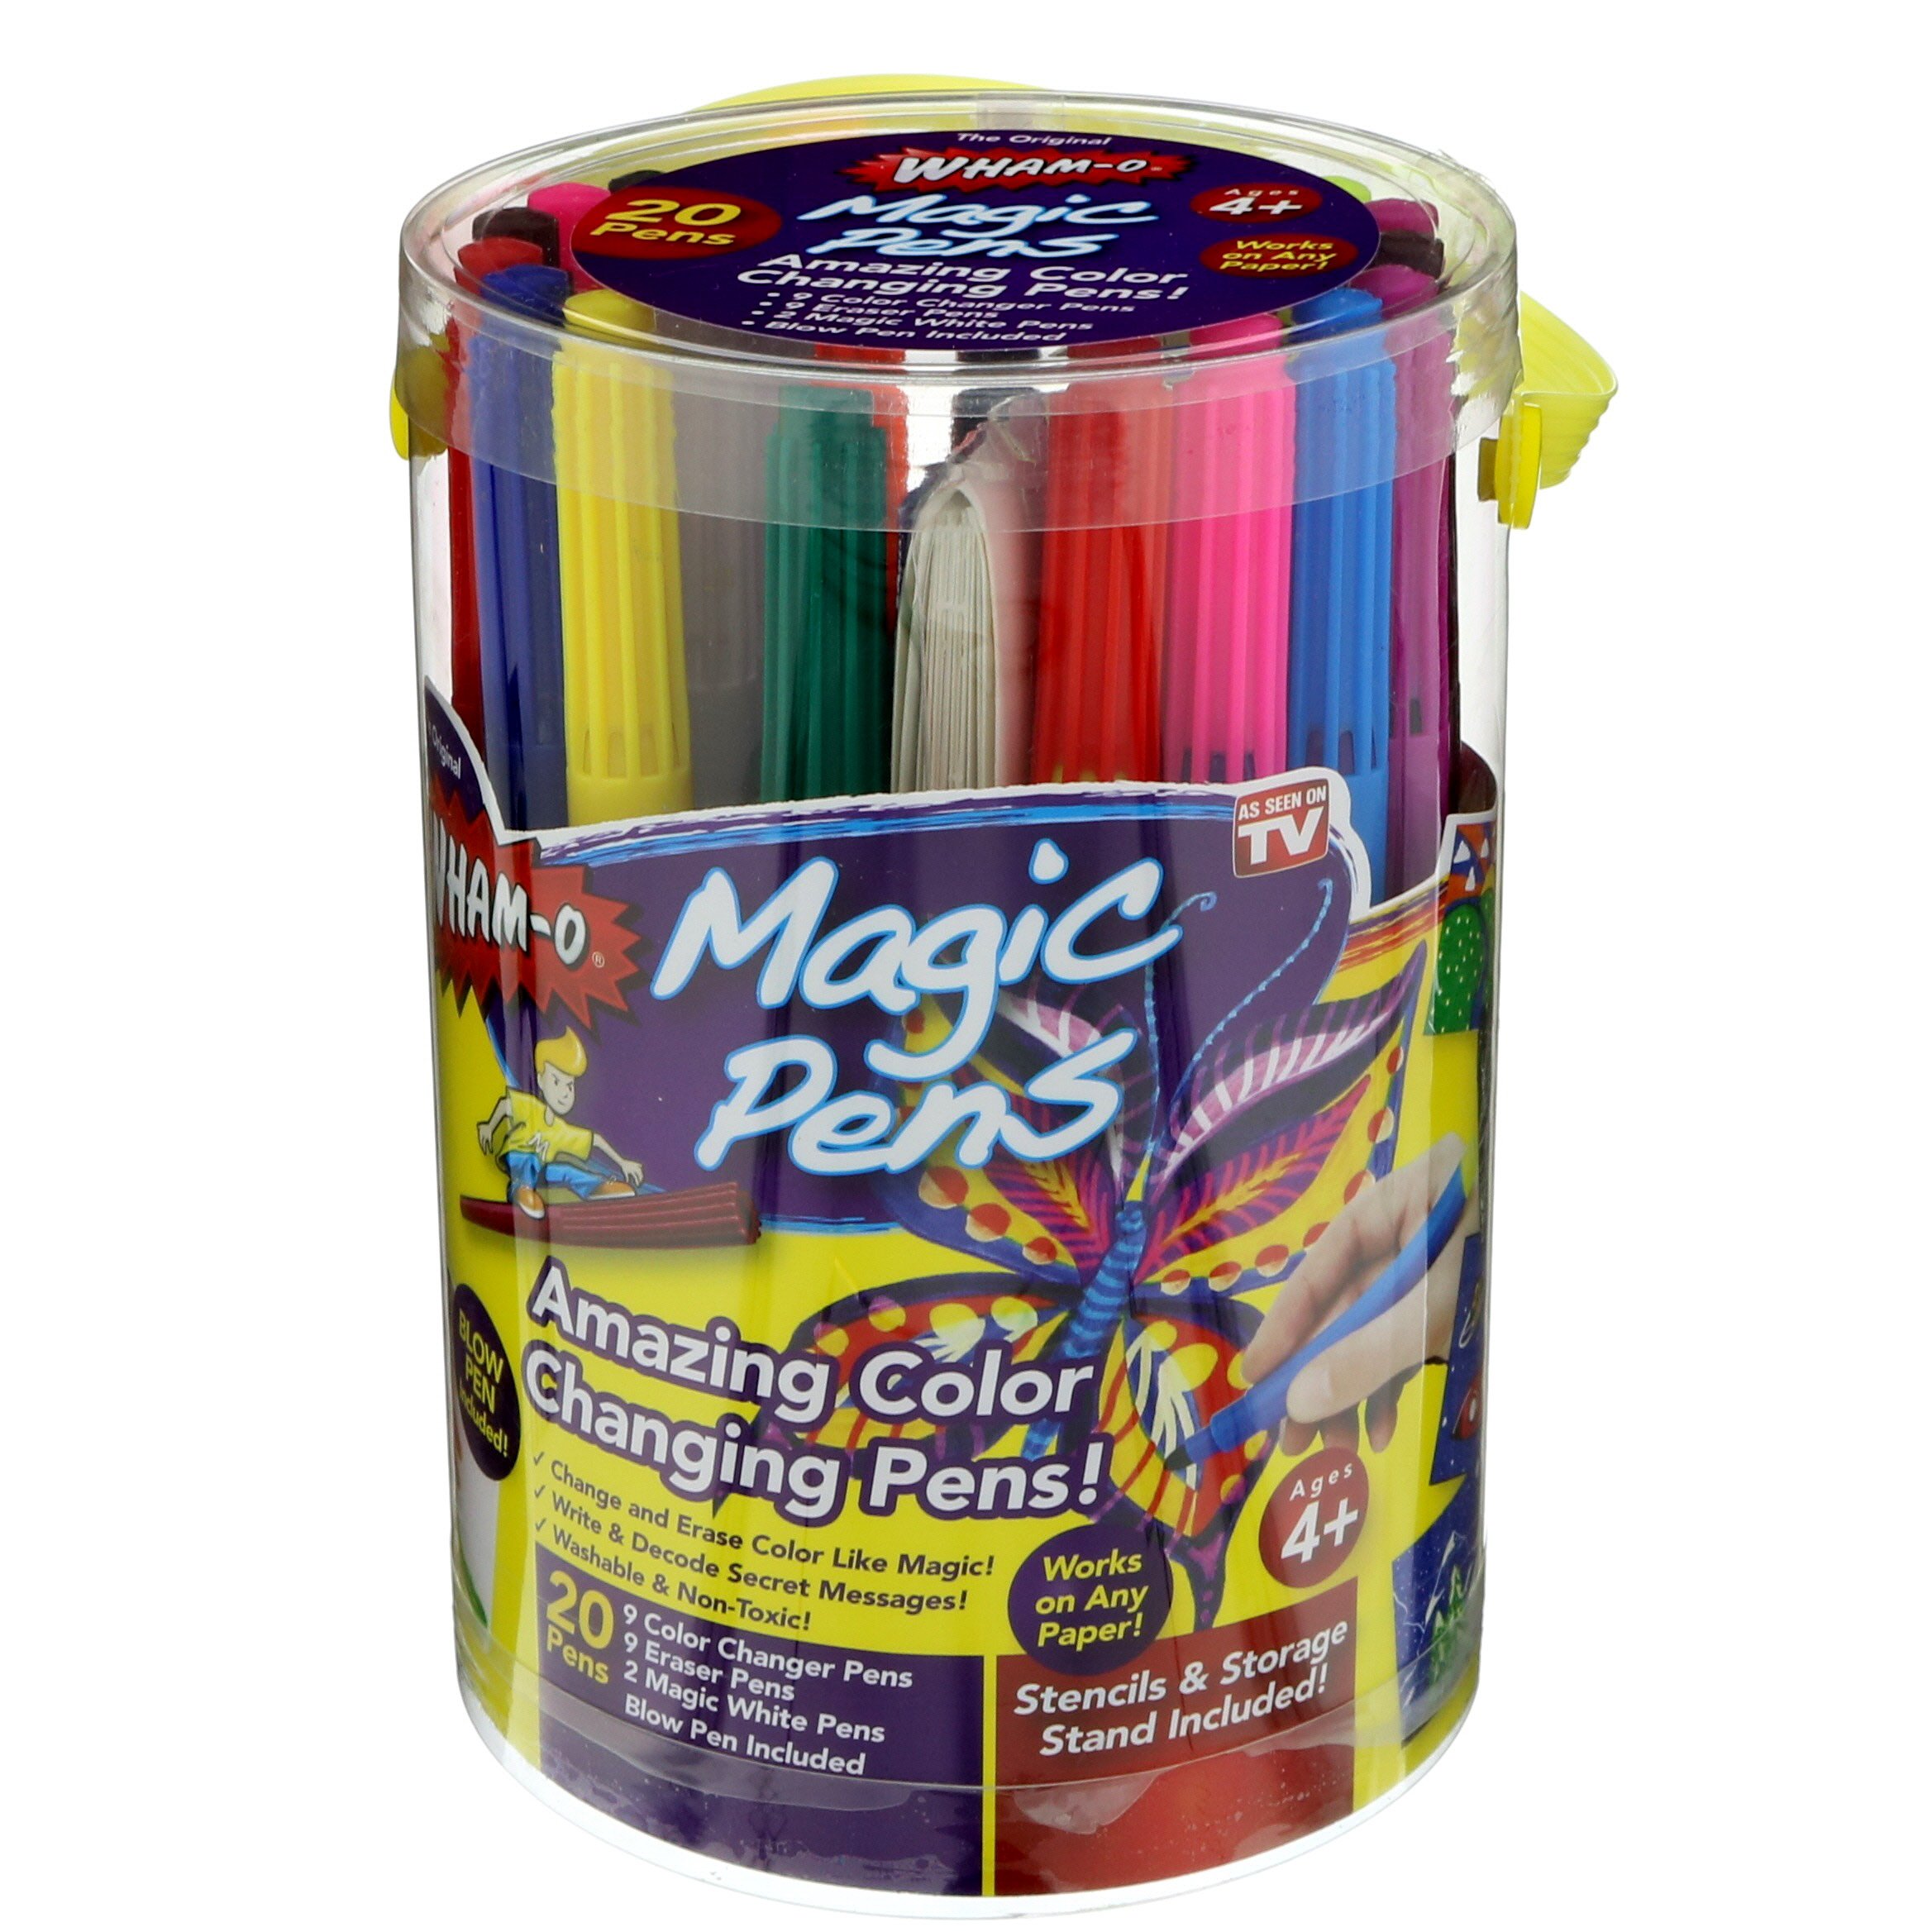 As Seen On TV Magic Pens by Wham-O